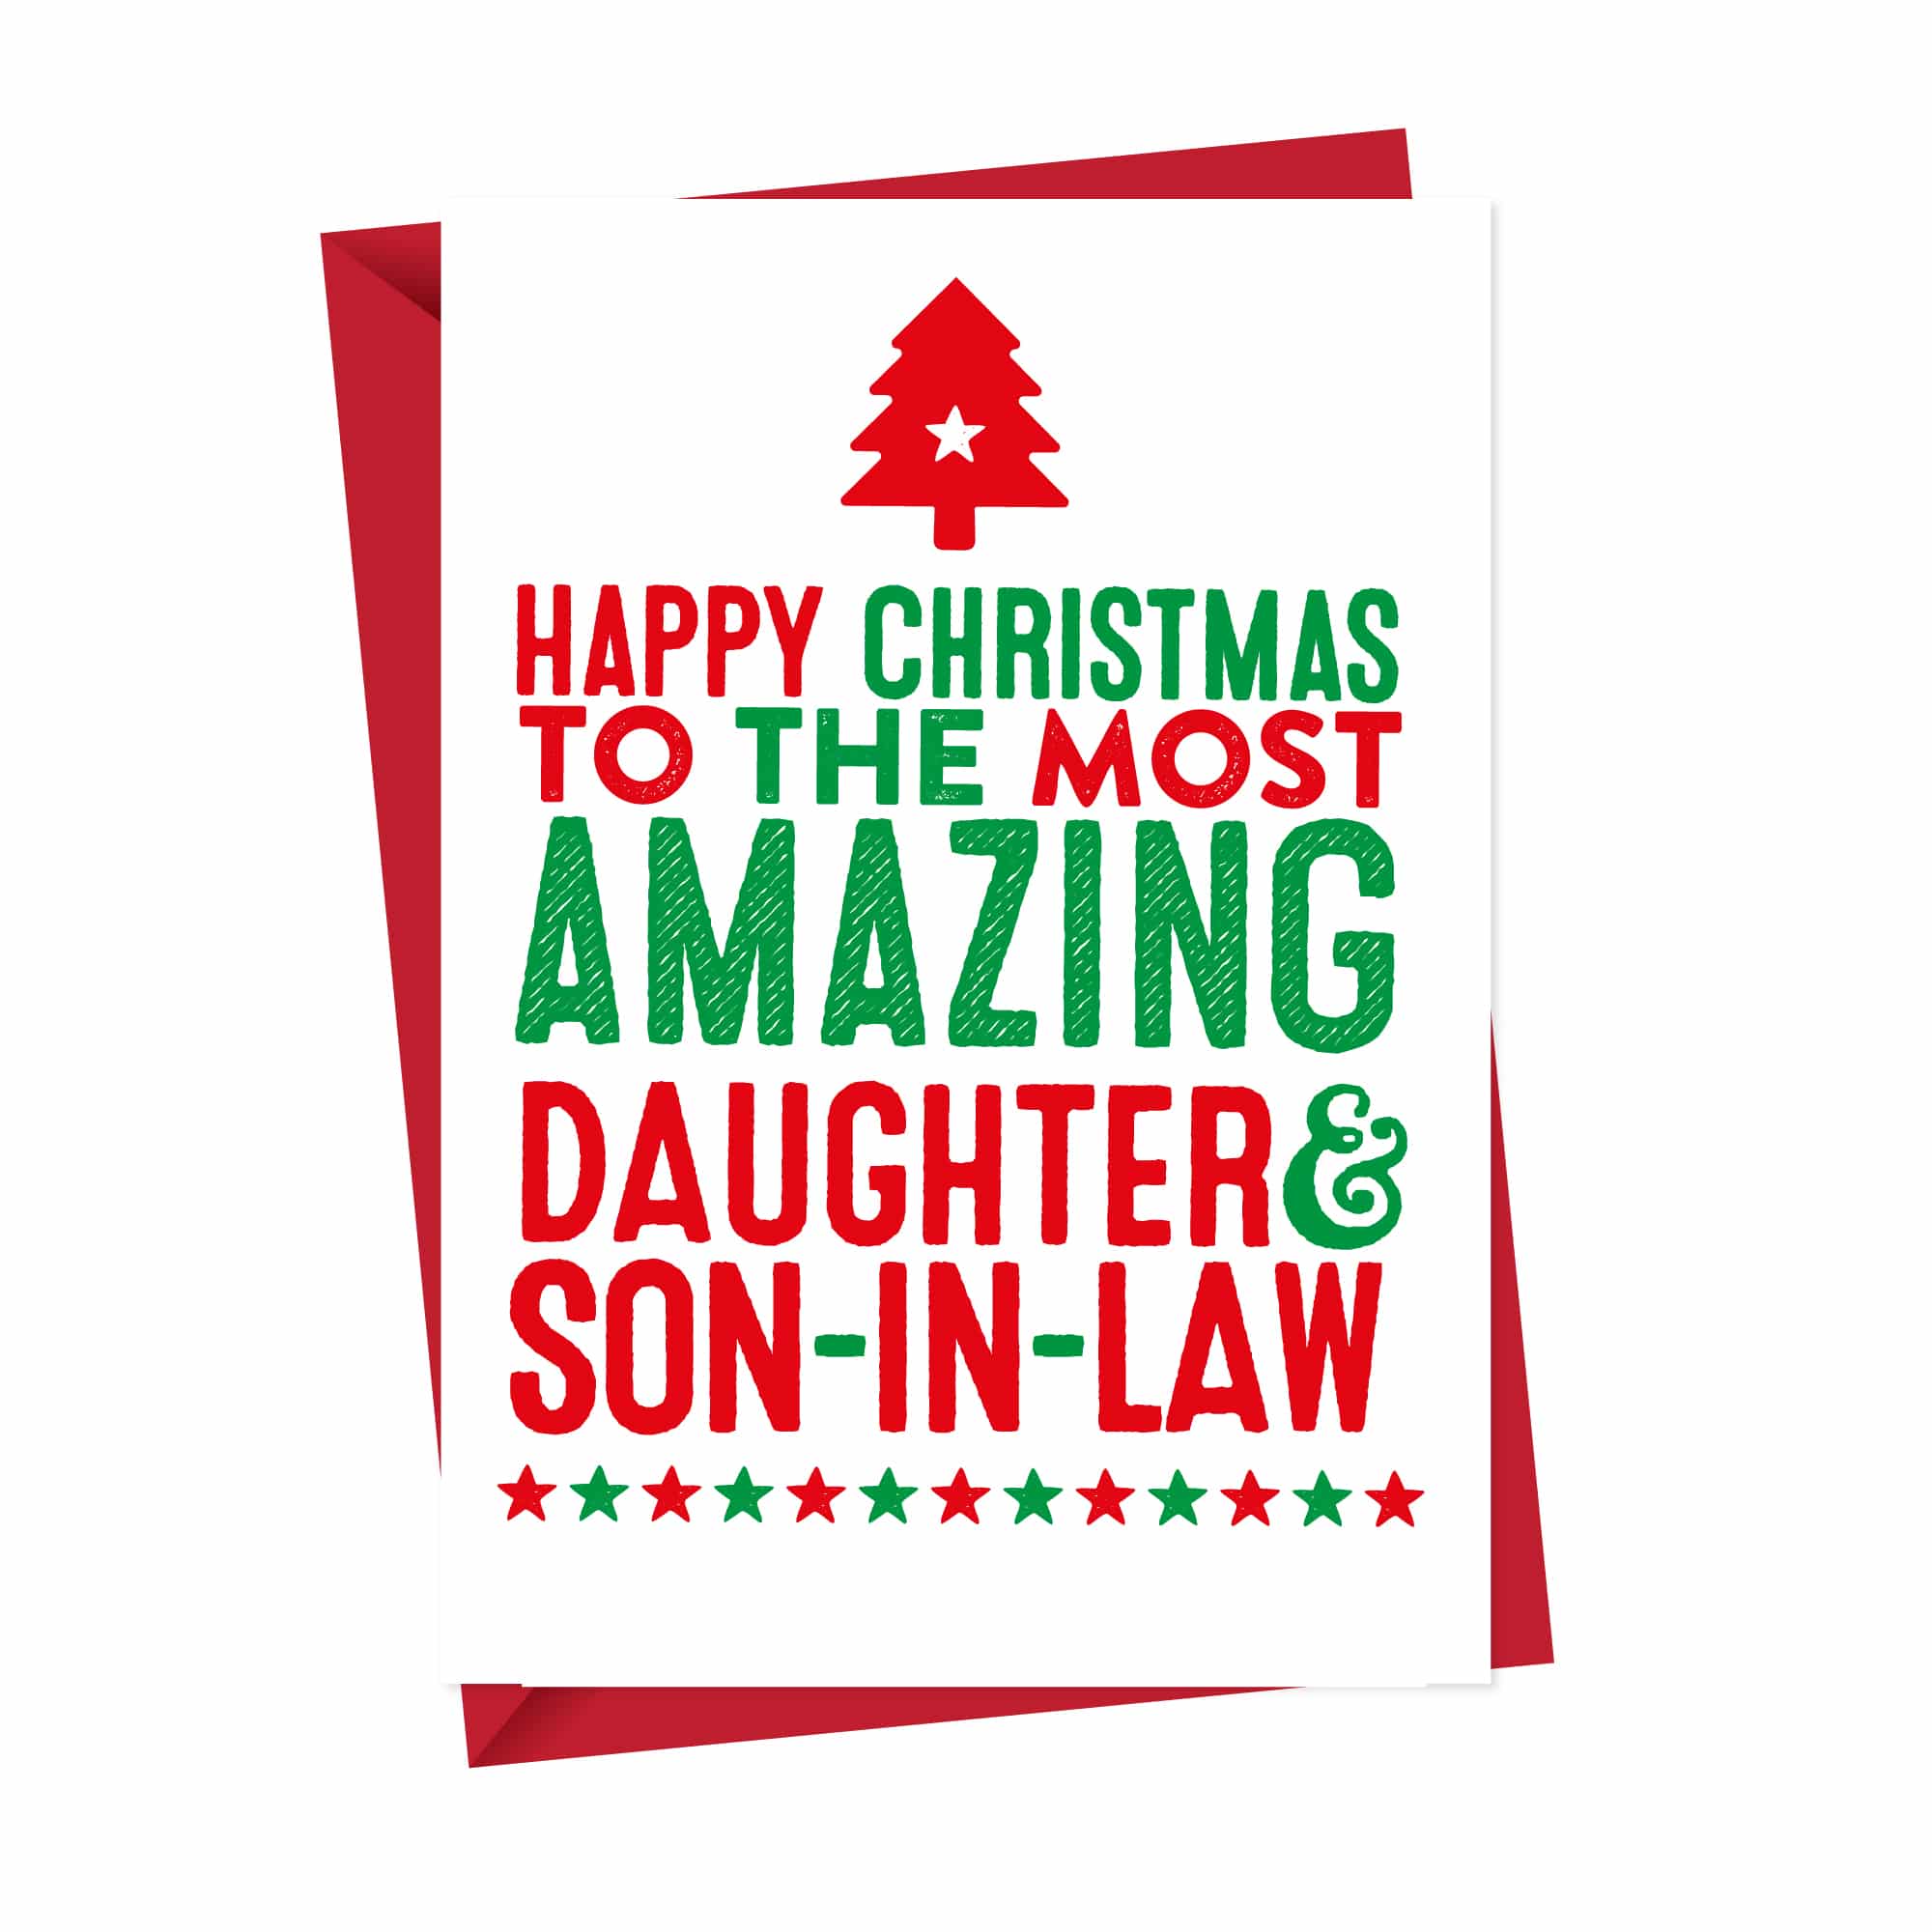 Amazing Daughter & Son in Law Christmas Card